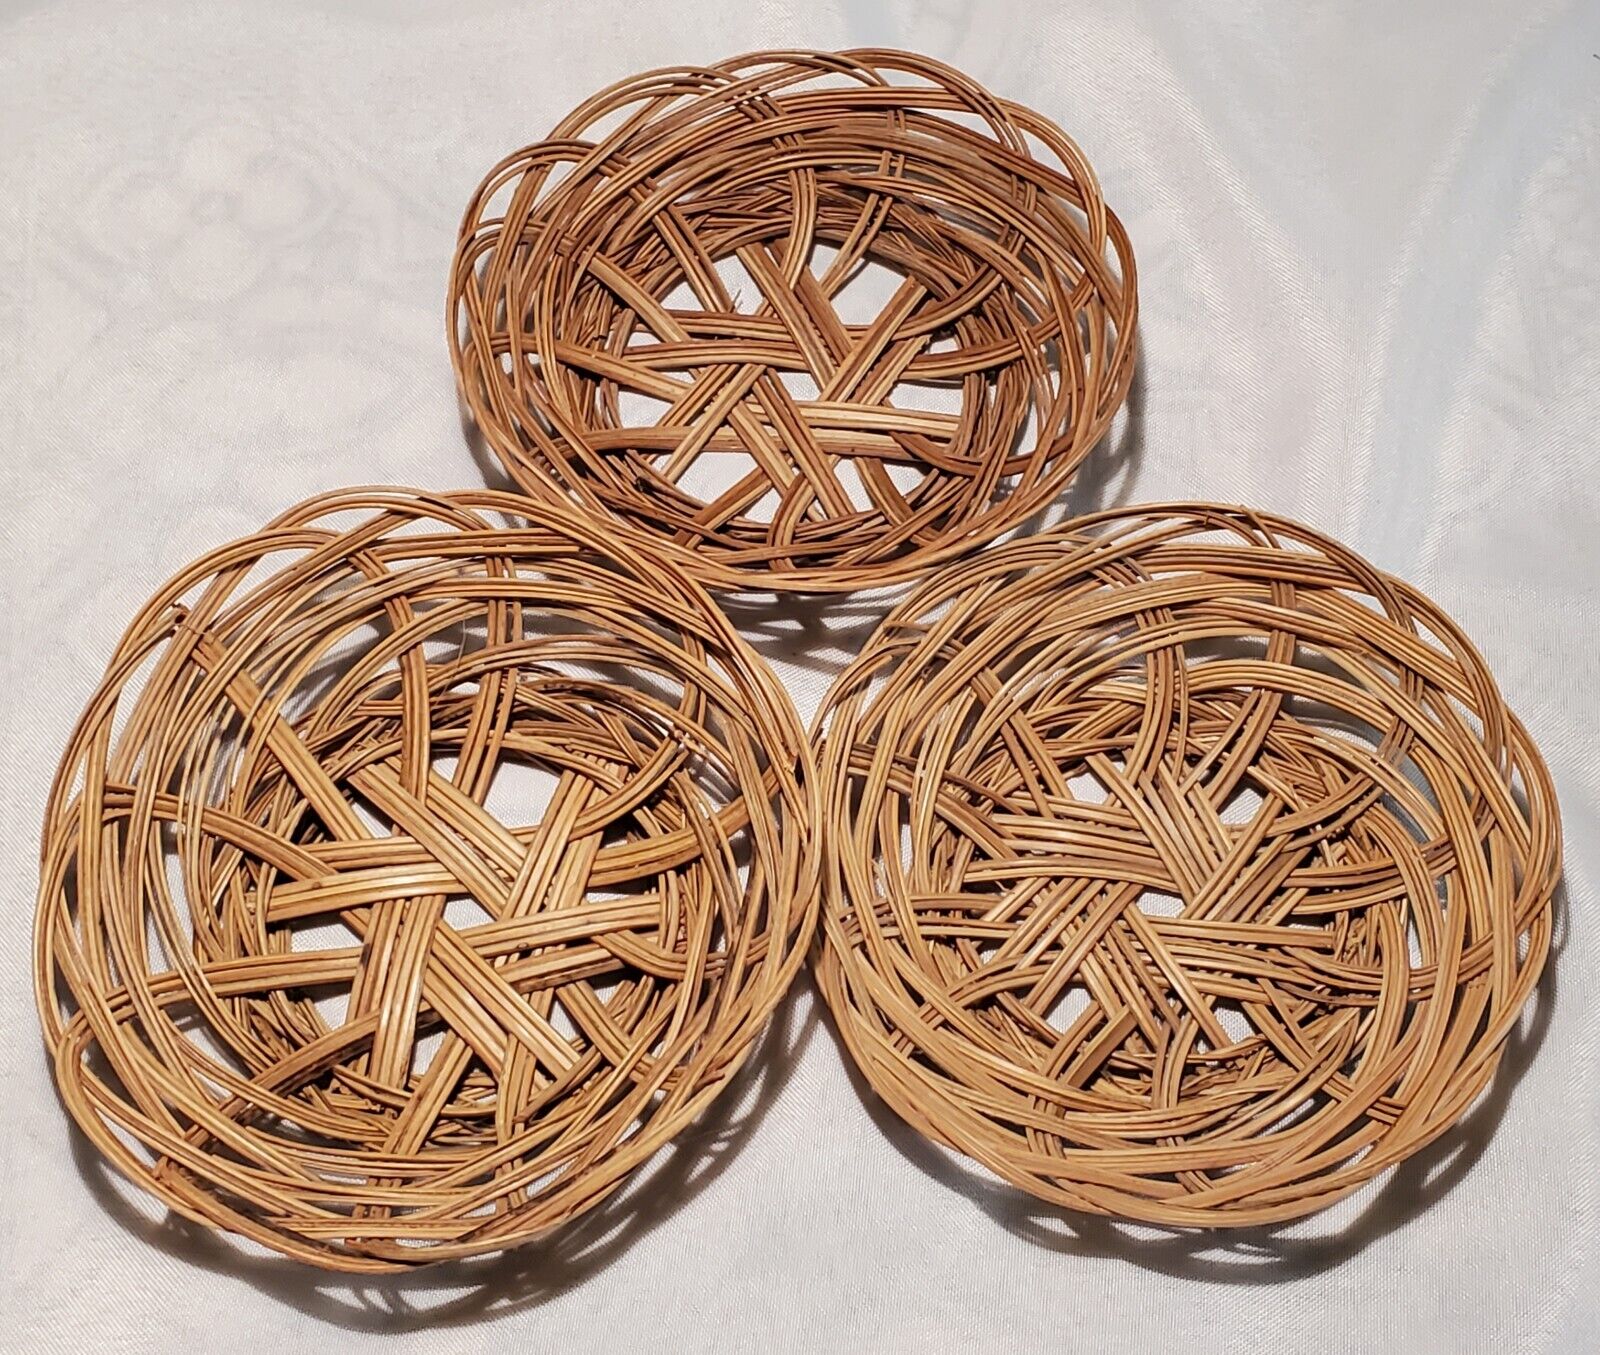 Vintage Set of 3 Small Round Woven Light Tone Wicker Basket